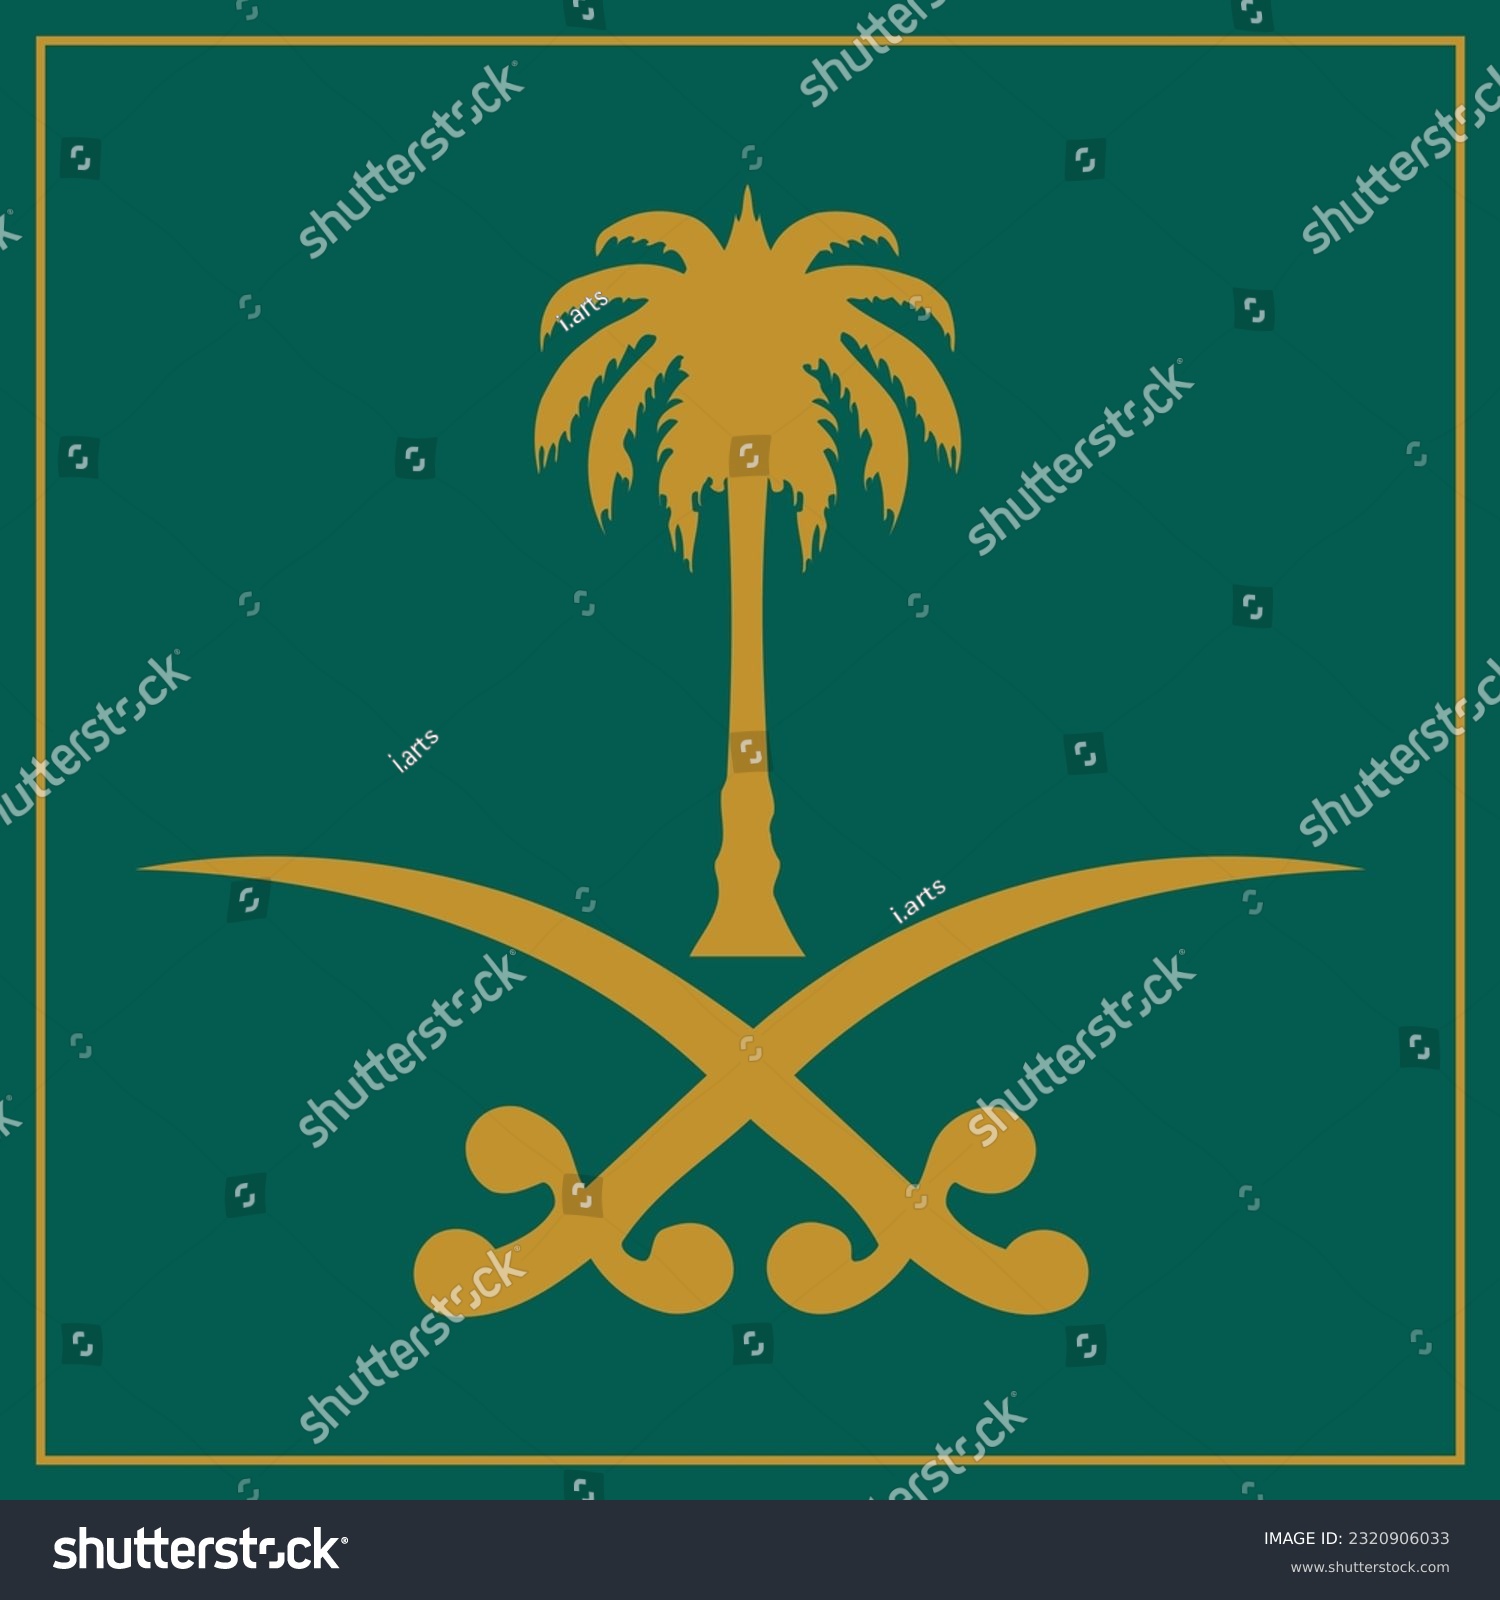 The emblem of Saudi Arabia is two crossed swords with a palm tree #2320906033